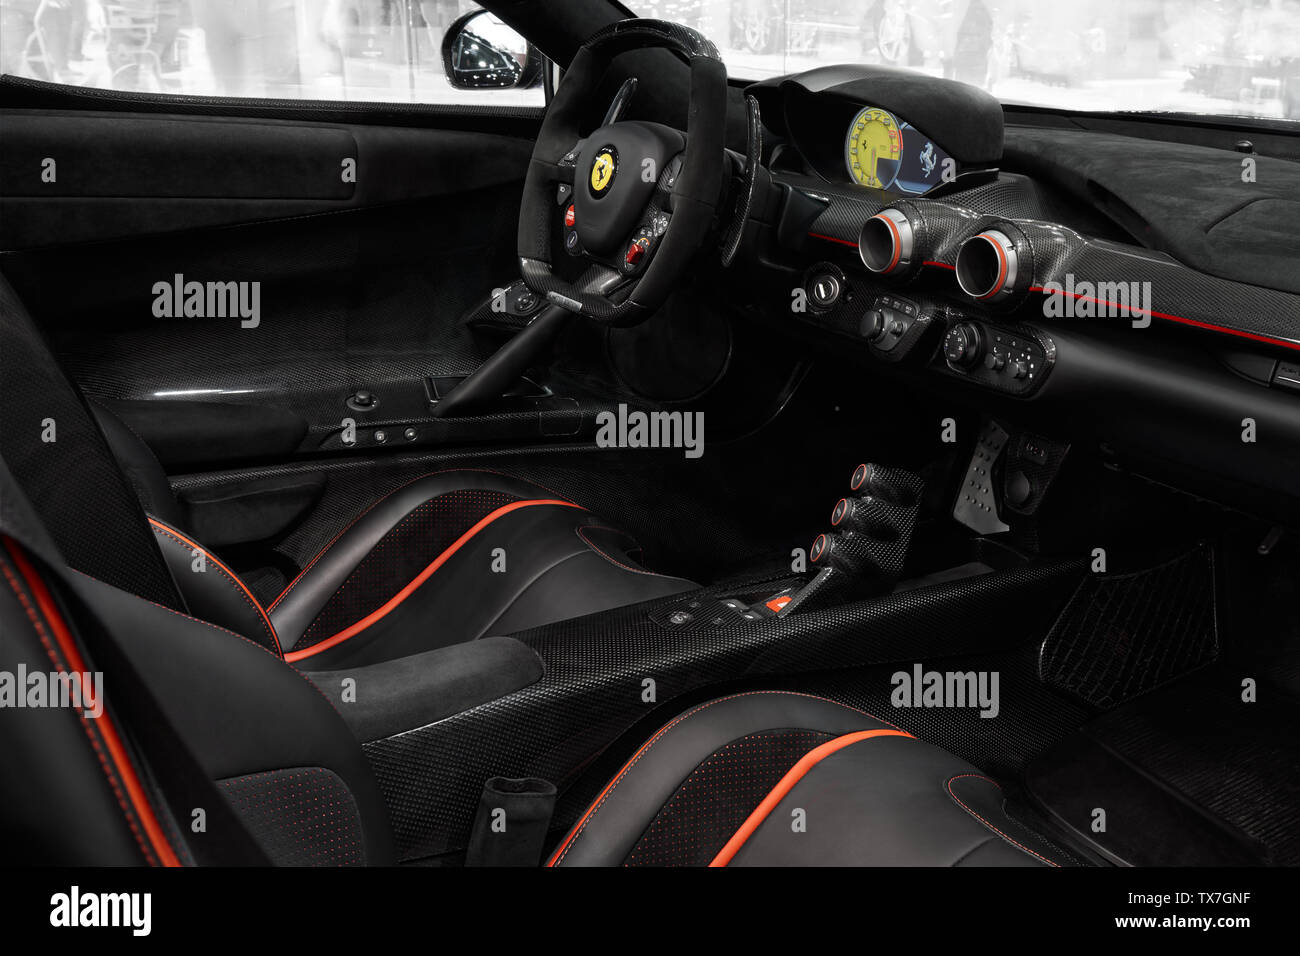 Poznan/Poland- 04.06.2017: interior of Ferrari LaFerrari , V12 gasoline engine with a capacity of 6.3 liters and 800 HP and 163 hp electric engine equ Stock Photo